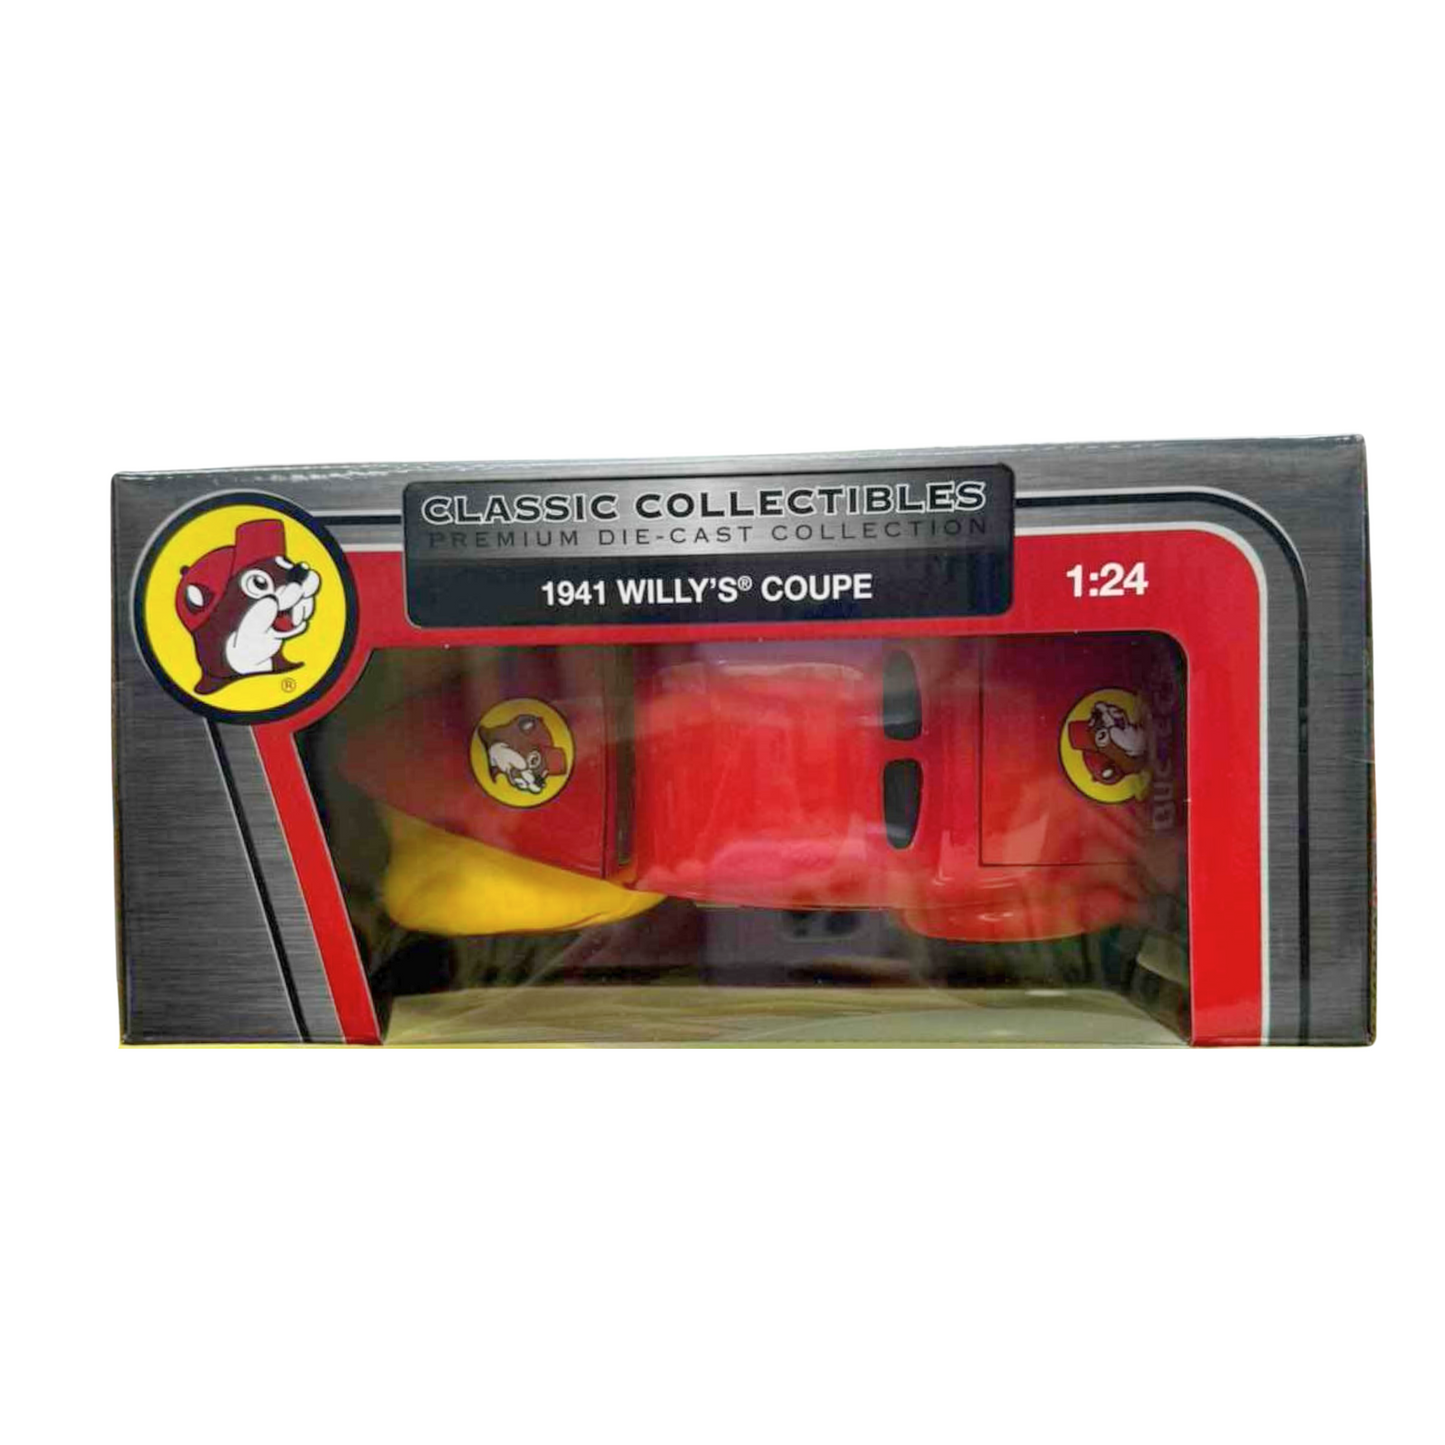 Buc-ee's 1941 Willy's Coupe Classic Collectibles Premium Die-Cast Collection buc ees buc ee's bucees buccees buc-ees